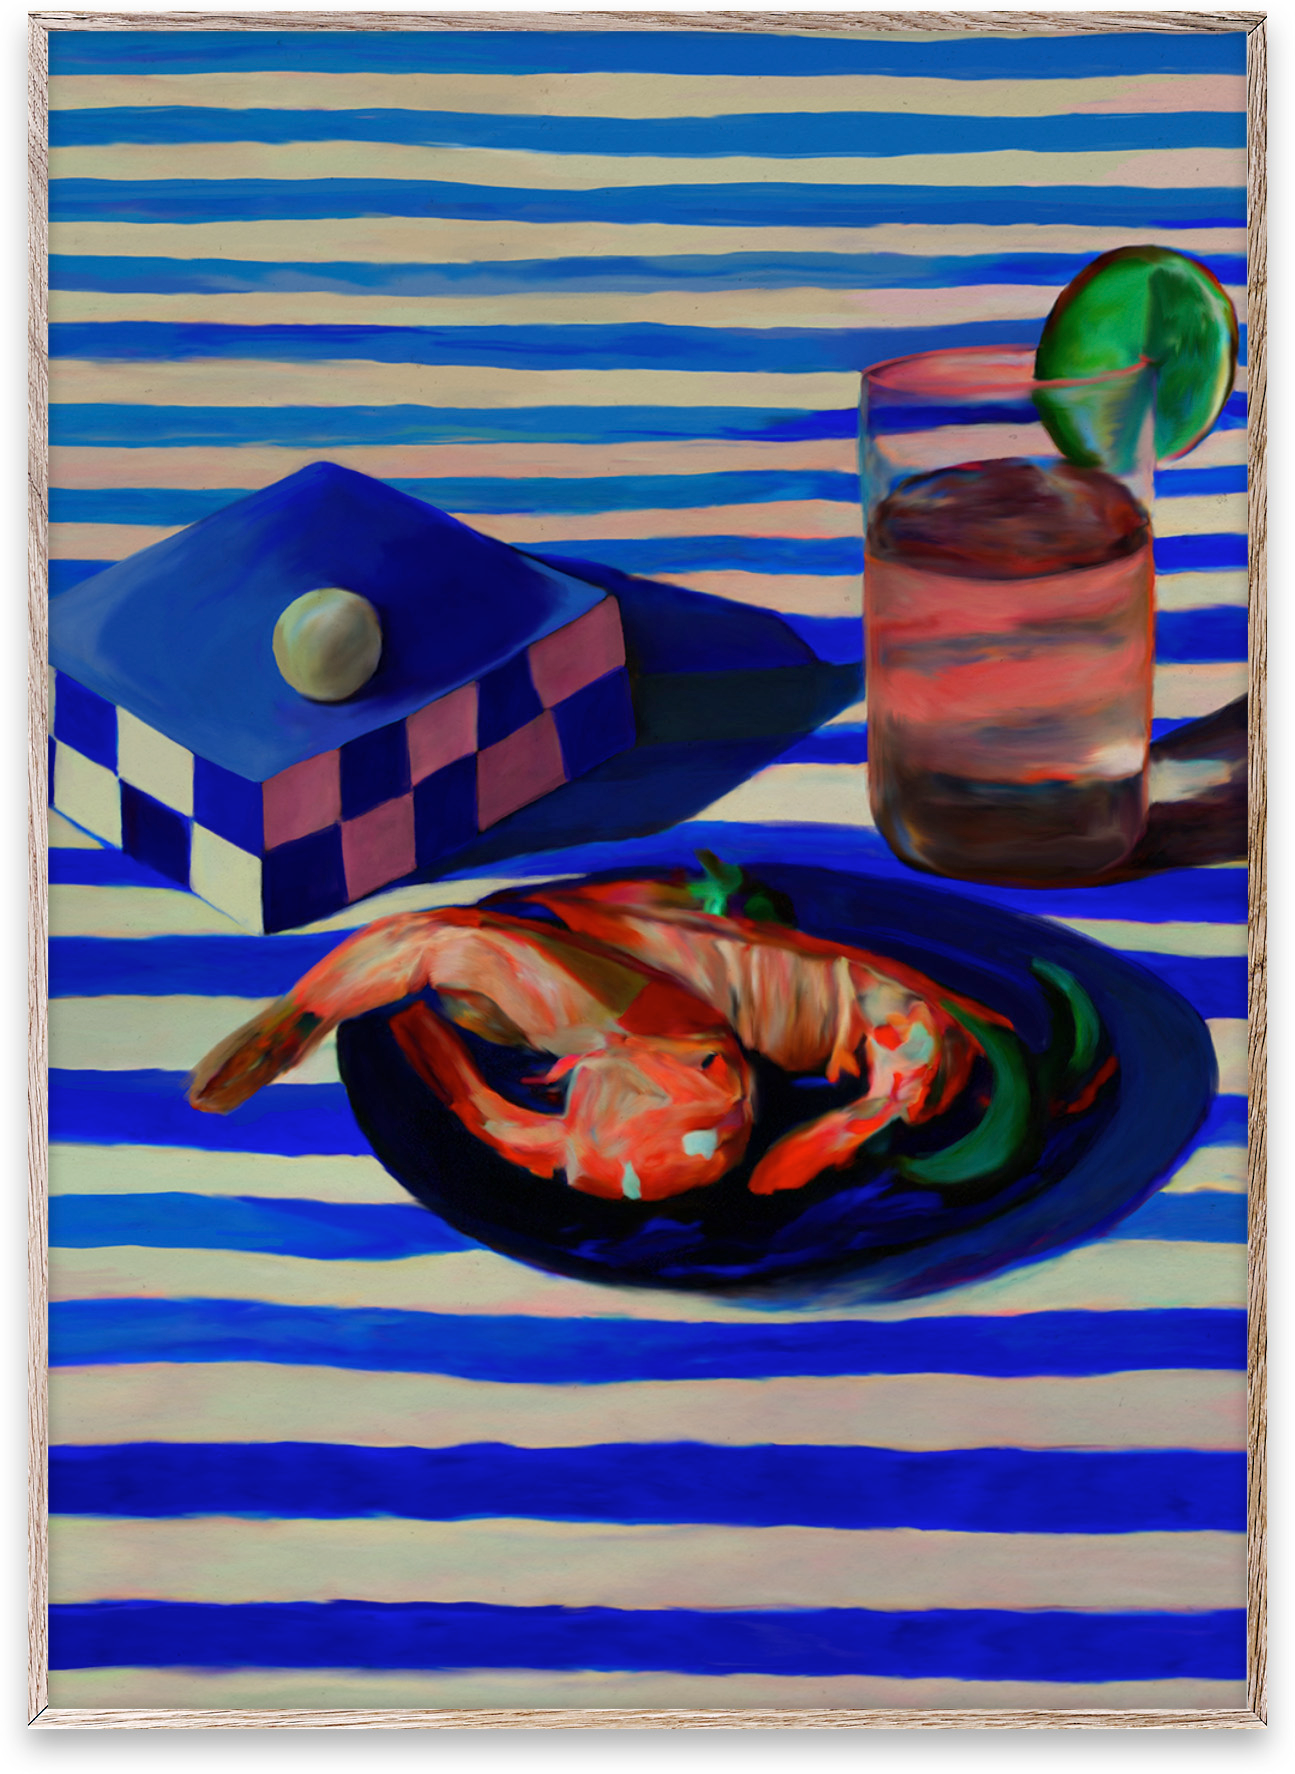 20122-20123-20124_Shrimp-and-Stripes_Misfitting-Things_1.png